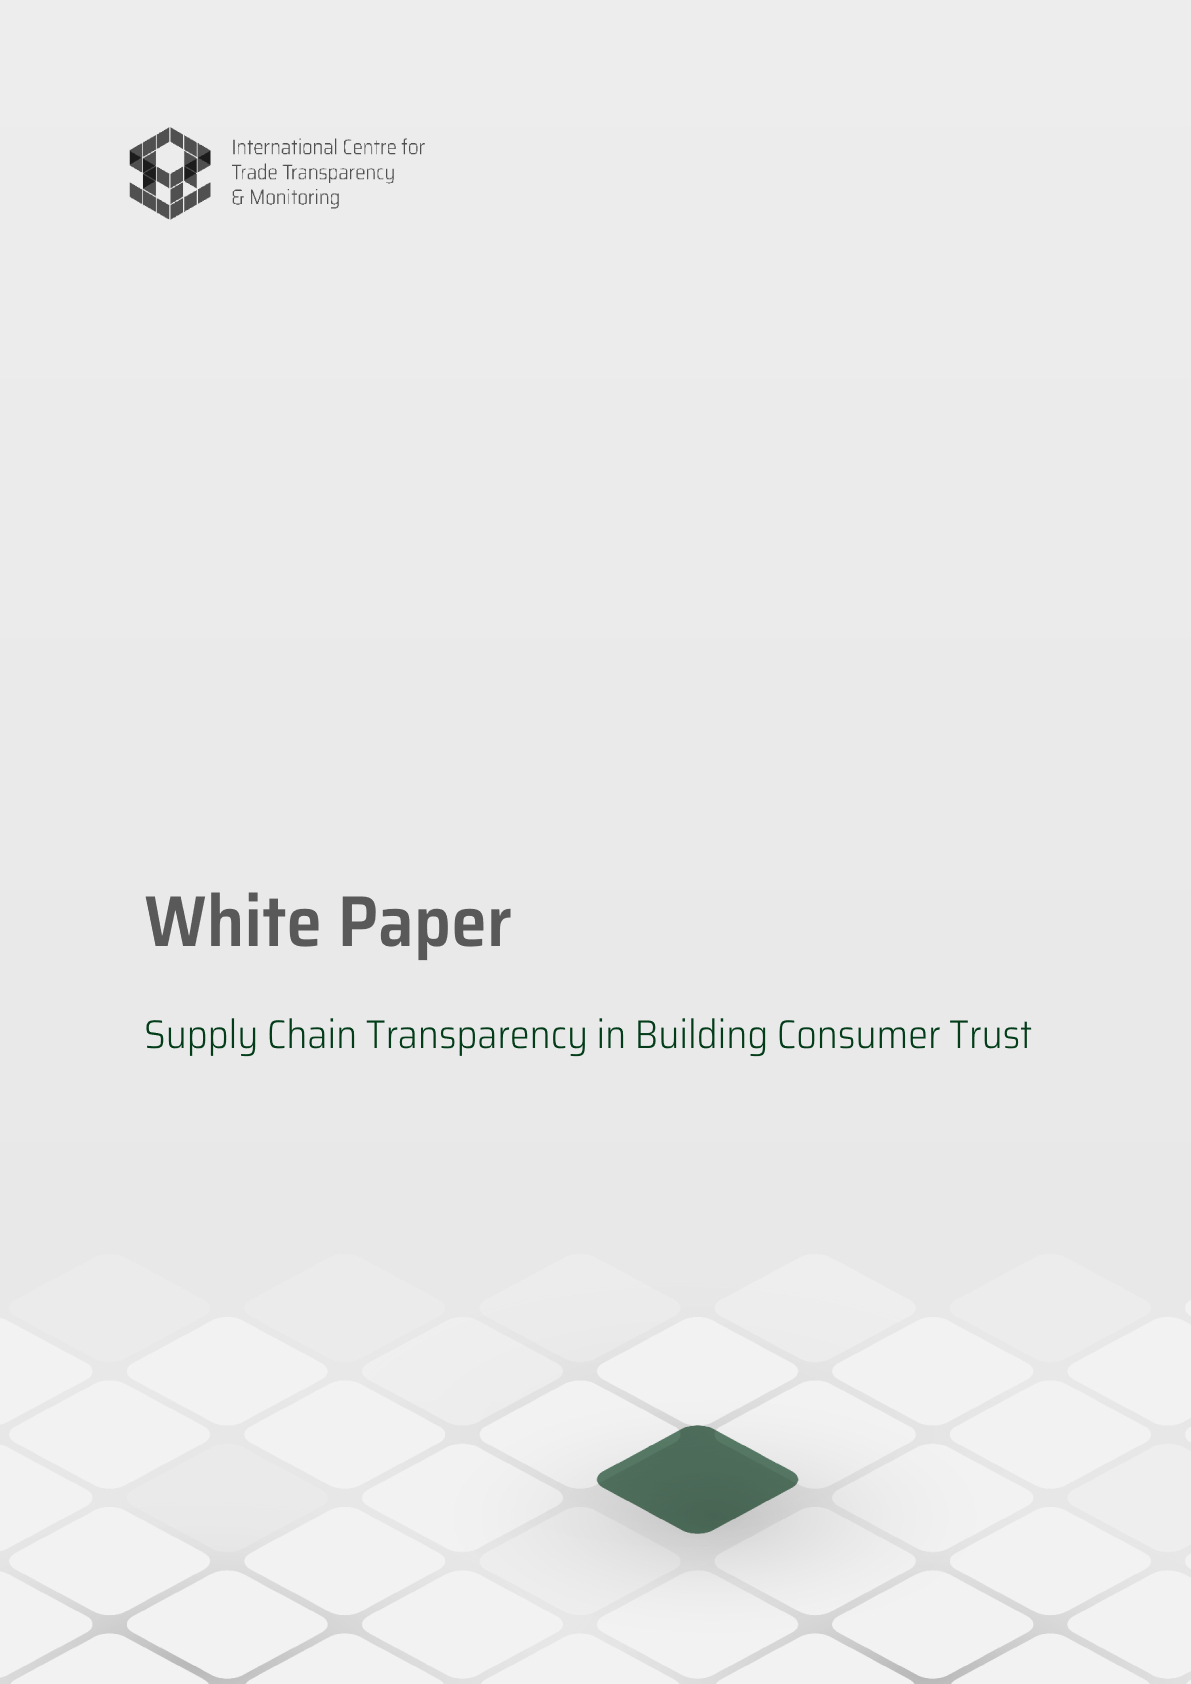 Supply Chain Transparency in Building Consumer Trust